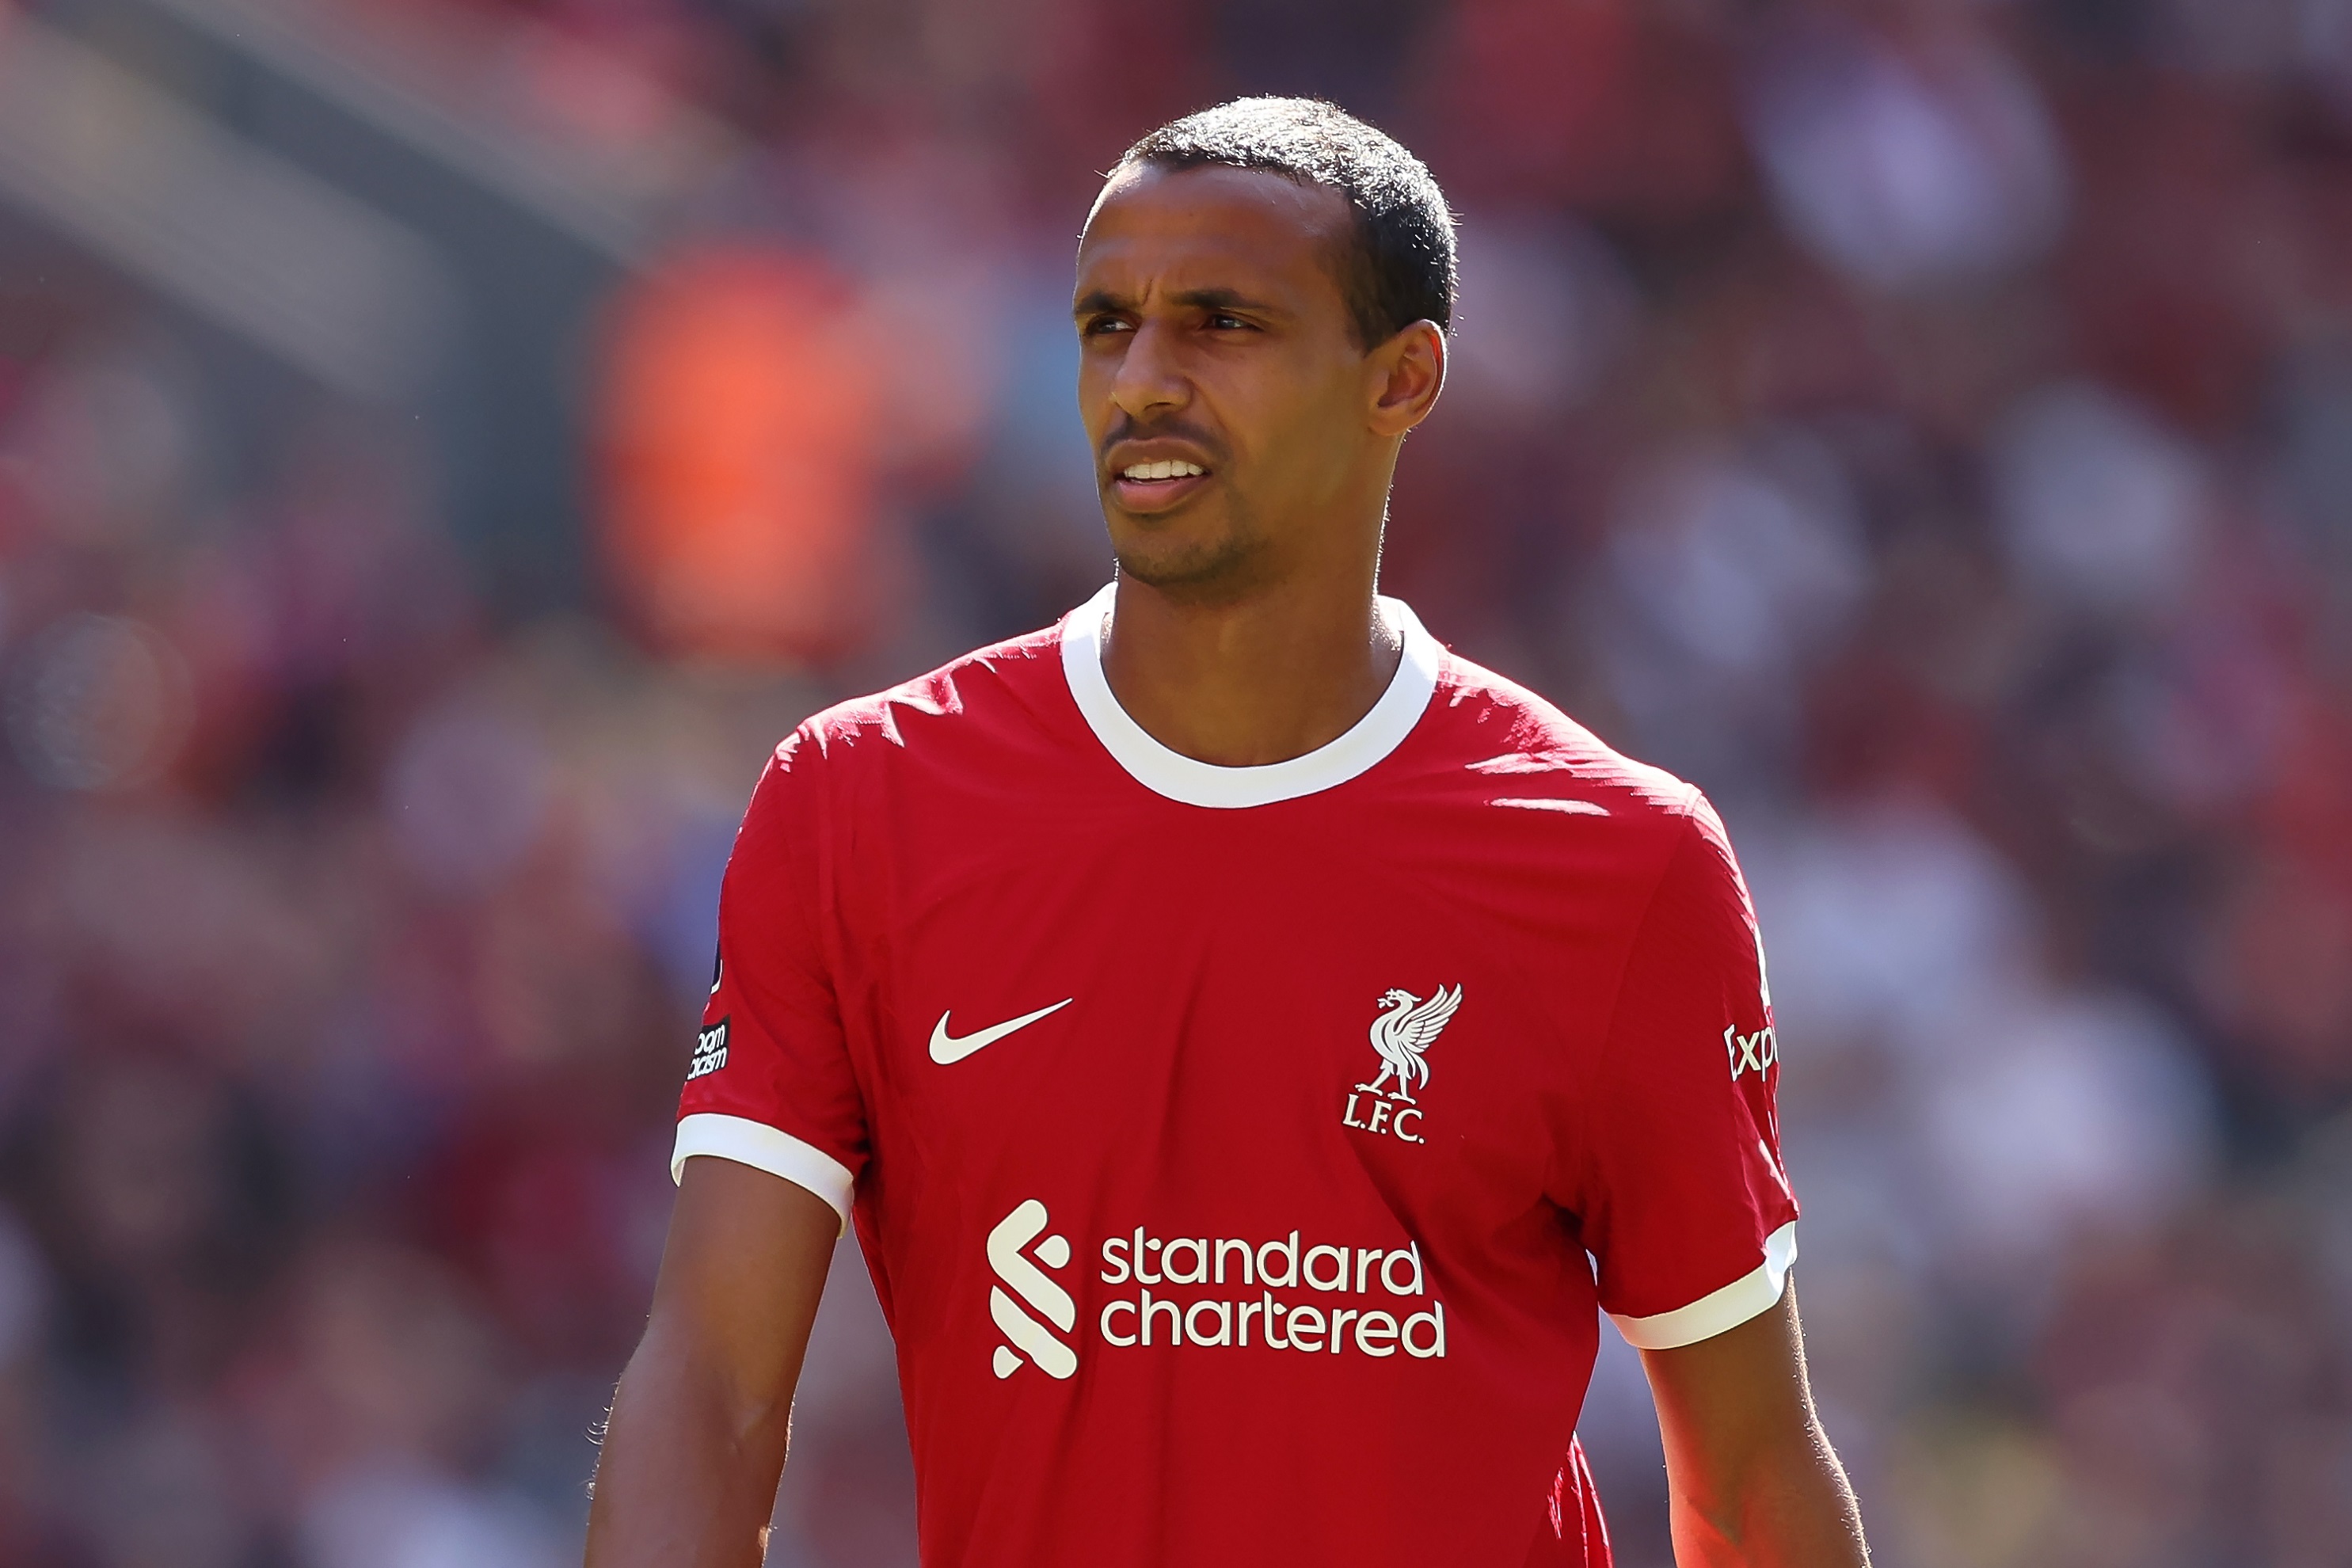 Roma and Lazio are on the prowl for cheap reinforcements and have earmarked Joel Matip, who will most likely leave Liverpool on a free.